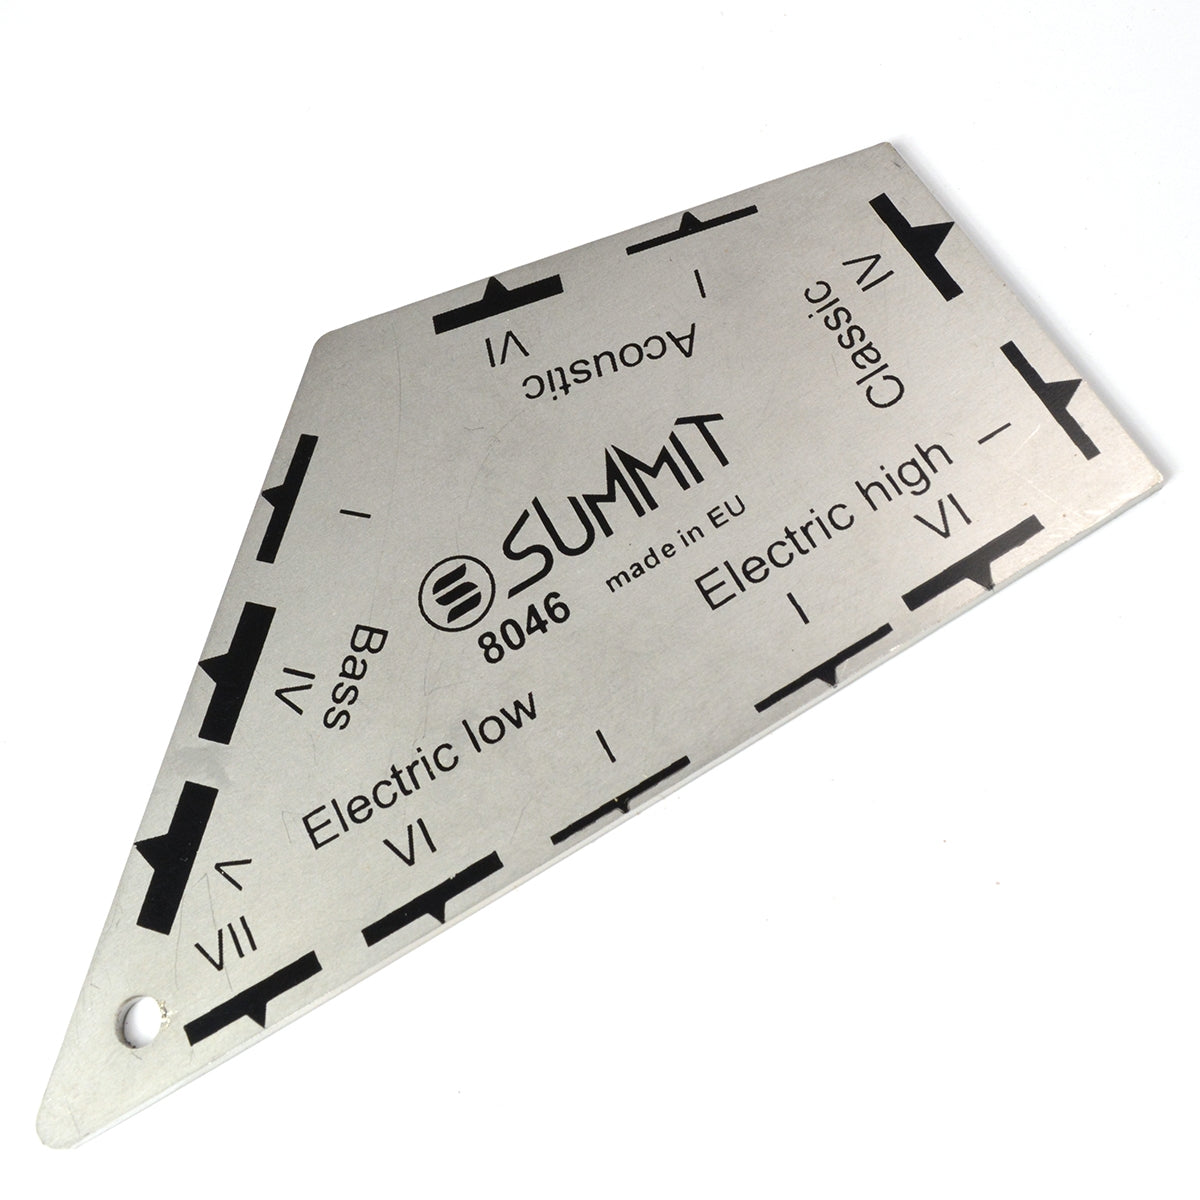 Combined High Fret Detector and string height gauge from Summit Tools